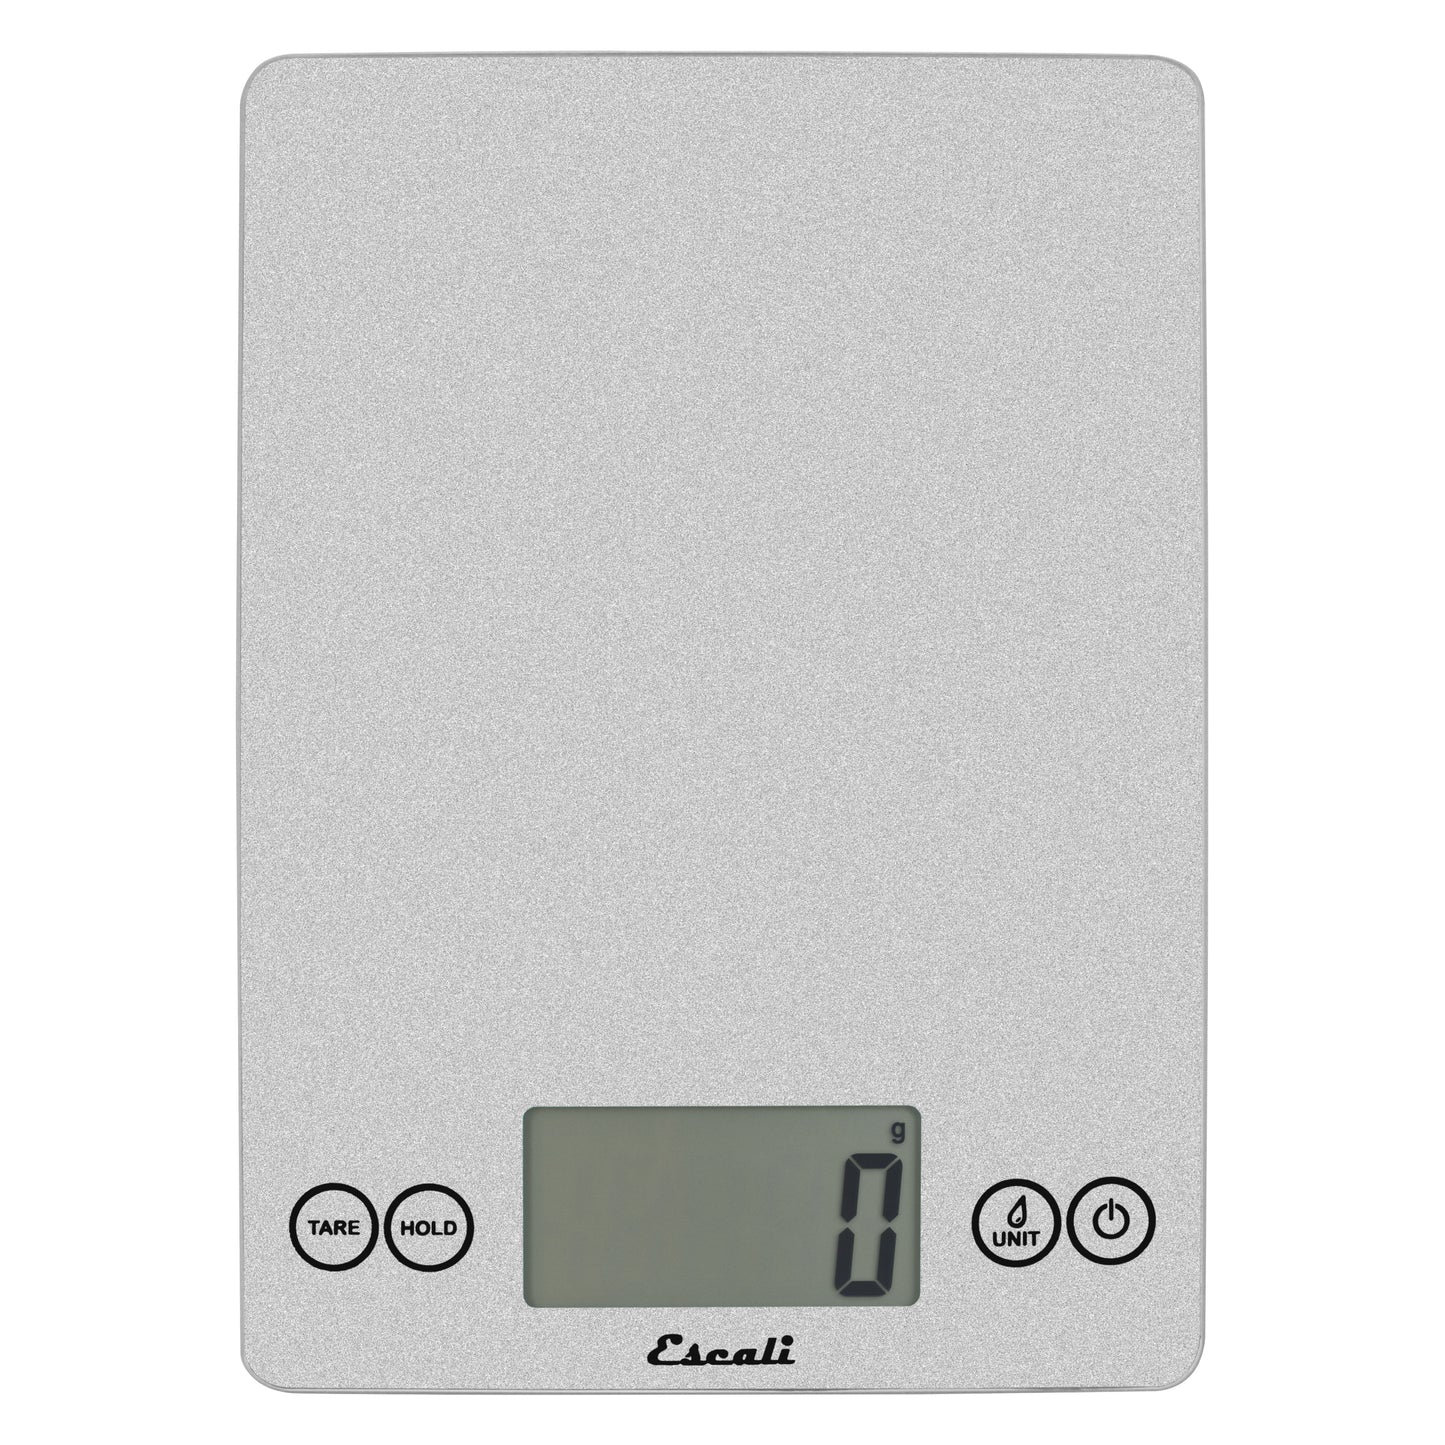 A photo of a shiny silver color ARTI Digital Kitchen Scale on a white background.